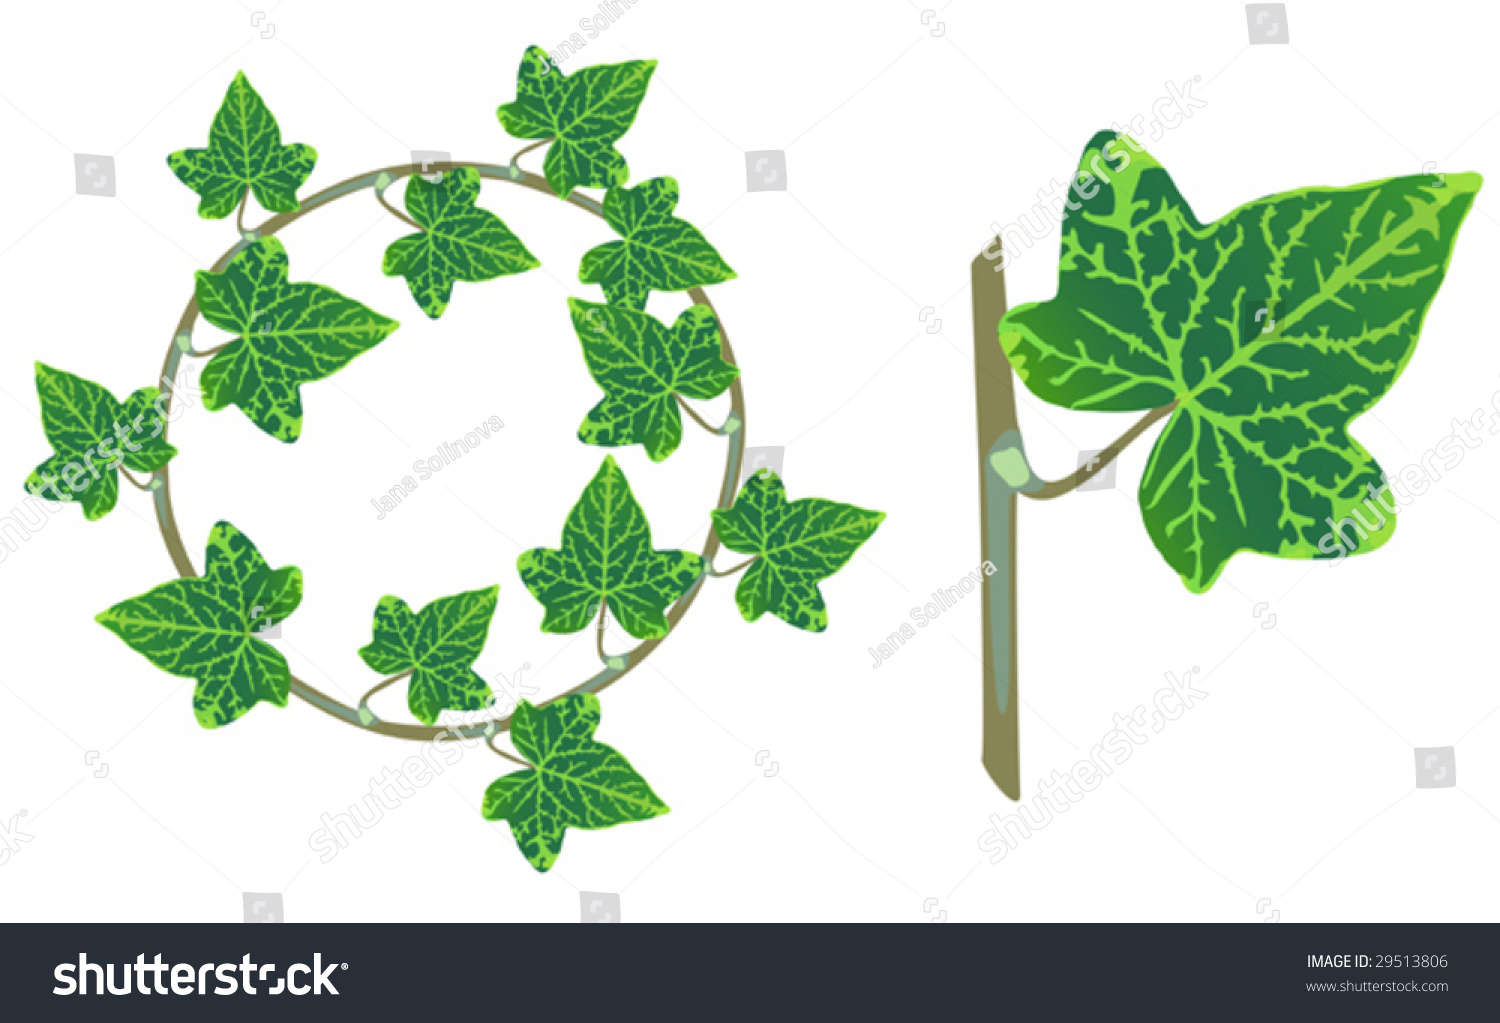 Ivy Design Elements Isolated On White Stock Vector 